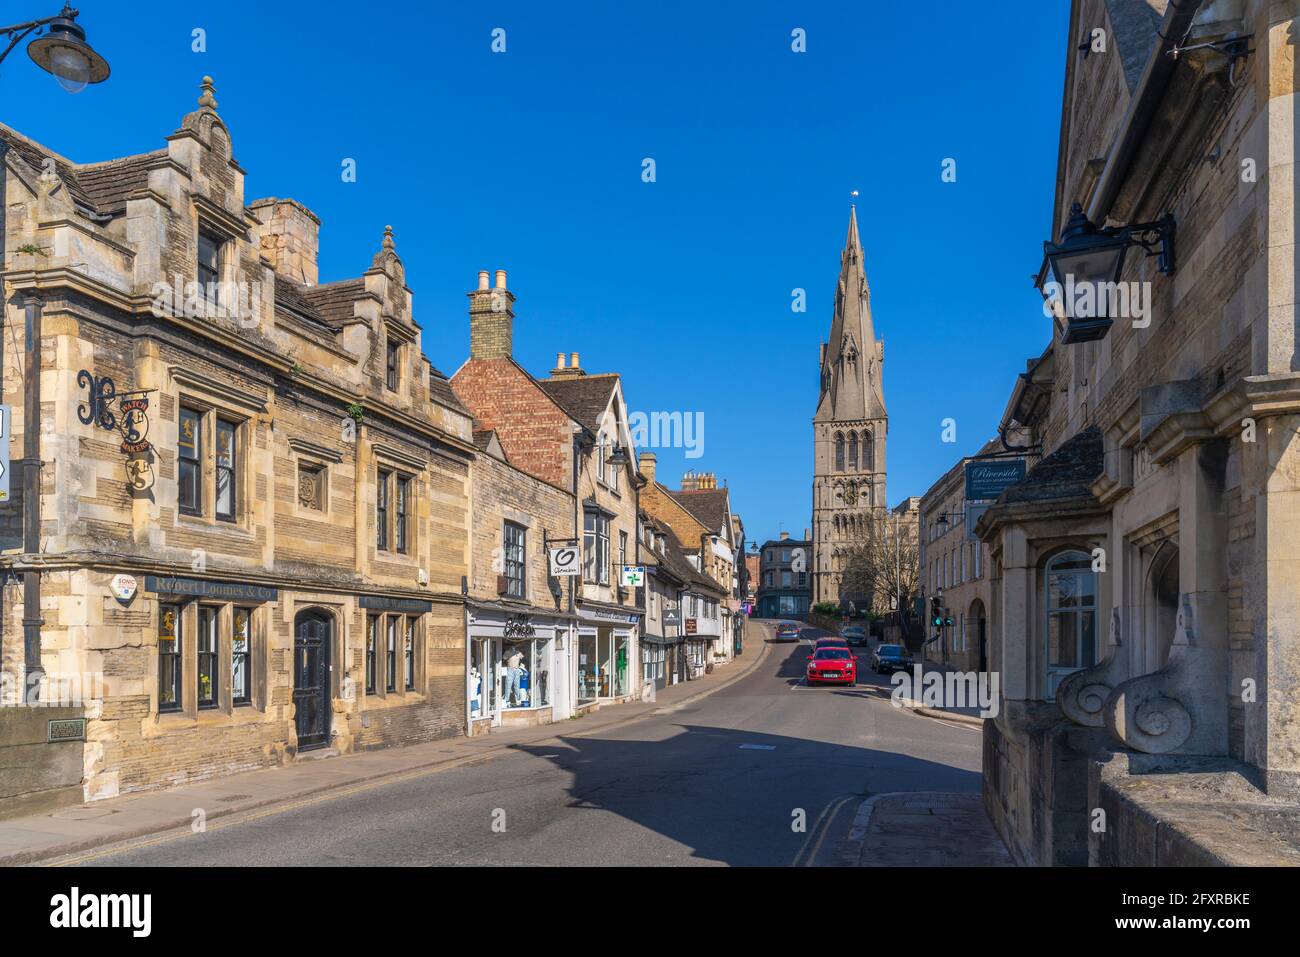 View of High Street and All Saints Church, Stamford, South Kesteven, Lincolnshire, England, United Kingdom, Europe Stock Photo